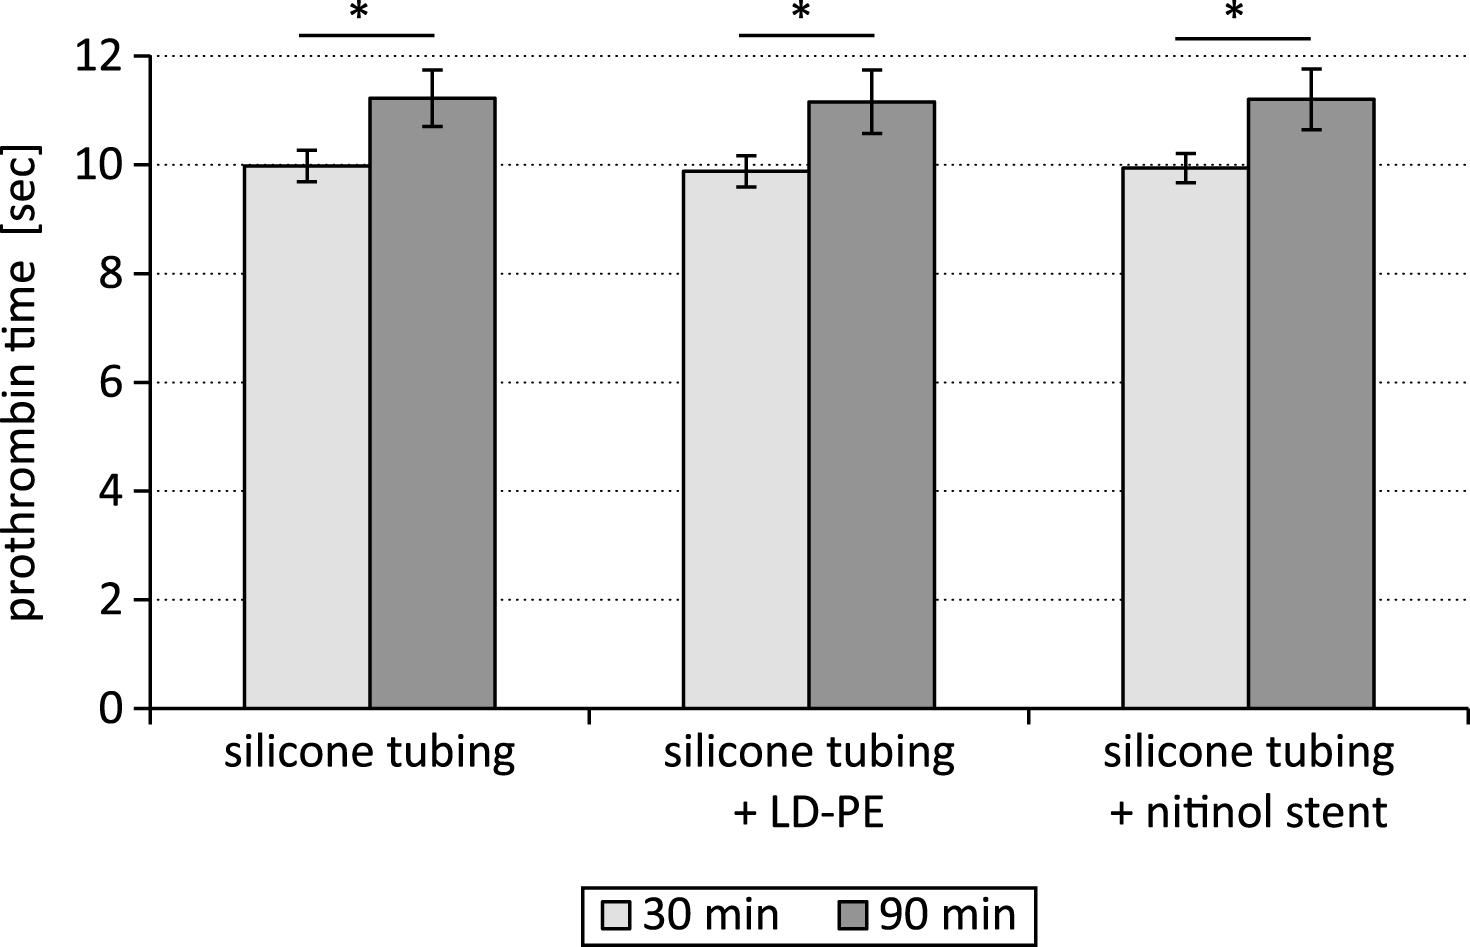 Prothrombin time after testing a silicone tubing with integrated samples (LD-PE: low density polyethylene tube, nitinol stent) in a closed loop model; * p < 0.05, n = 6.